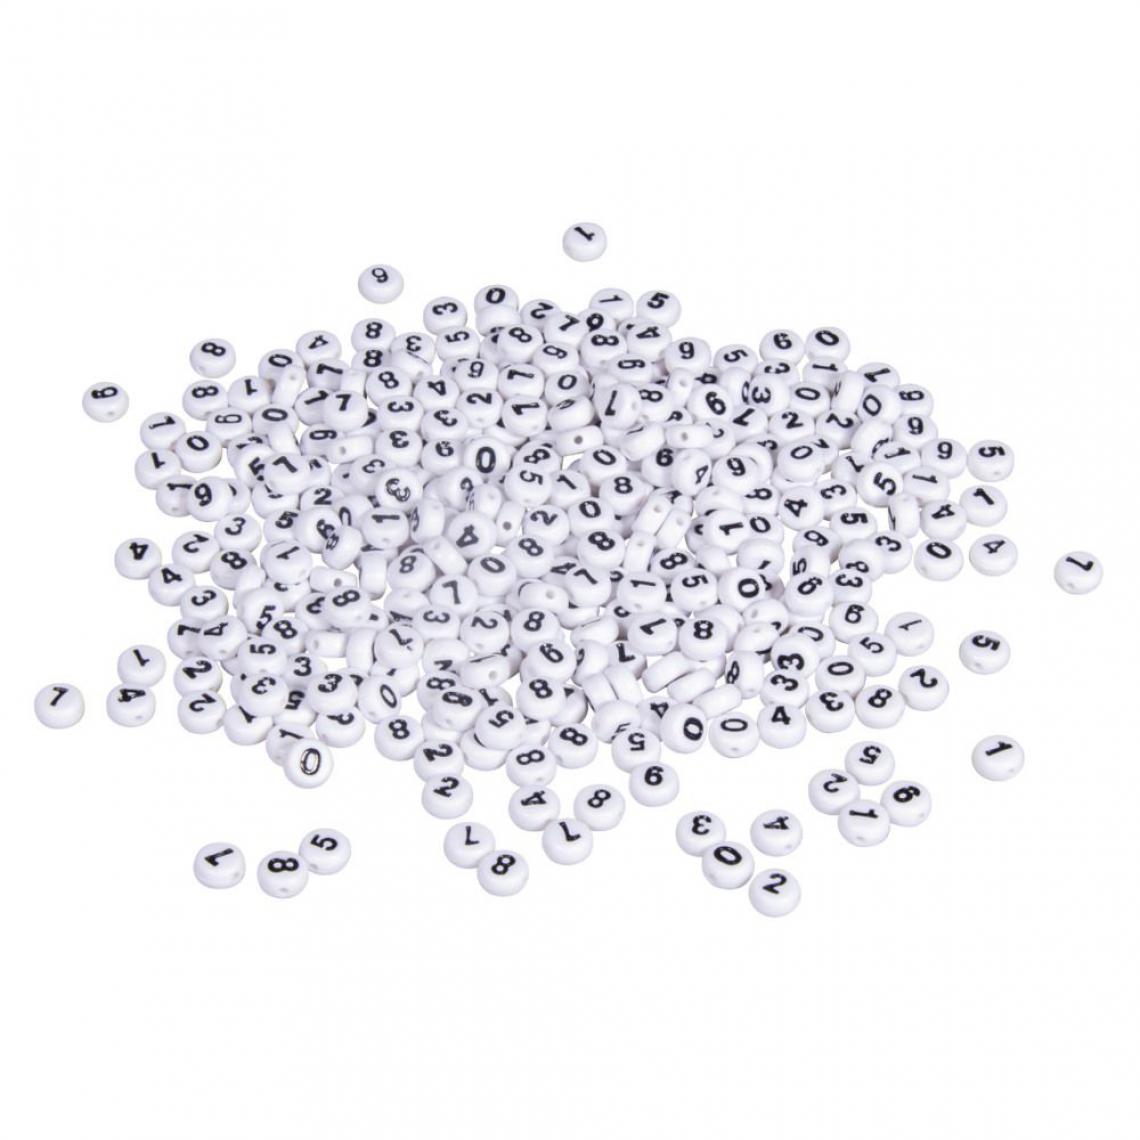 Rayher - Perles Chiffres rondes blanches ø 6 mm - Perles